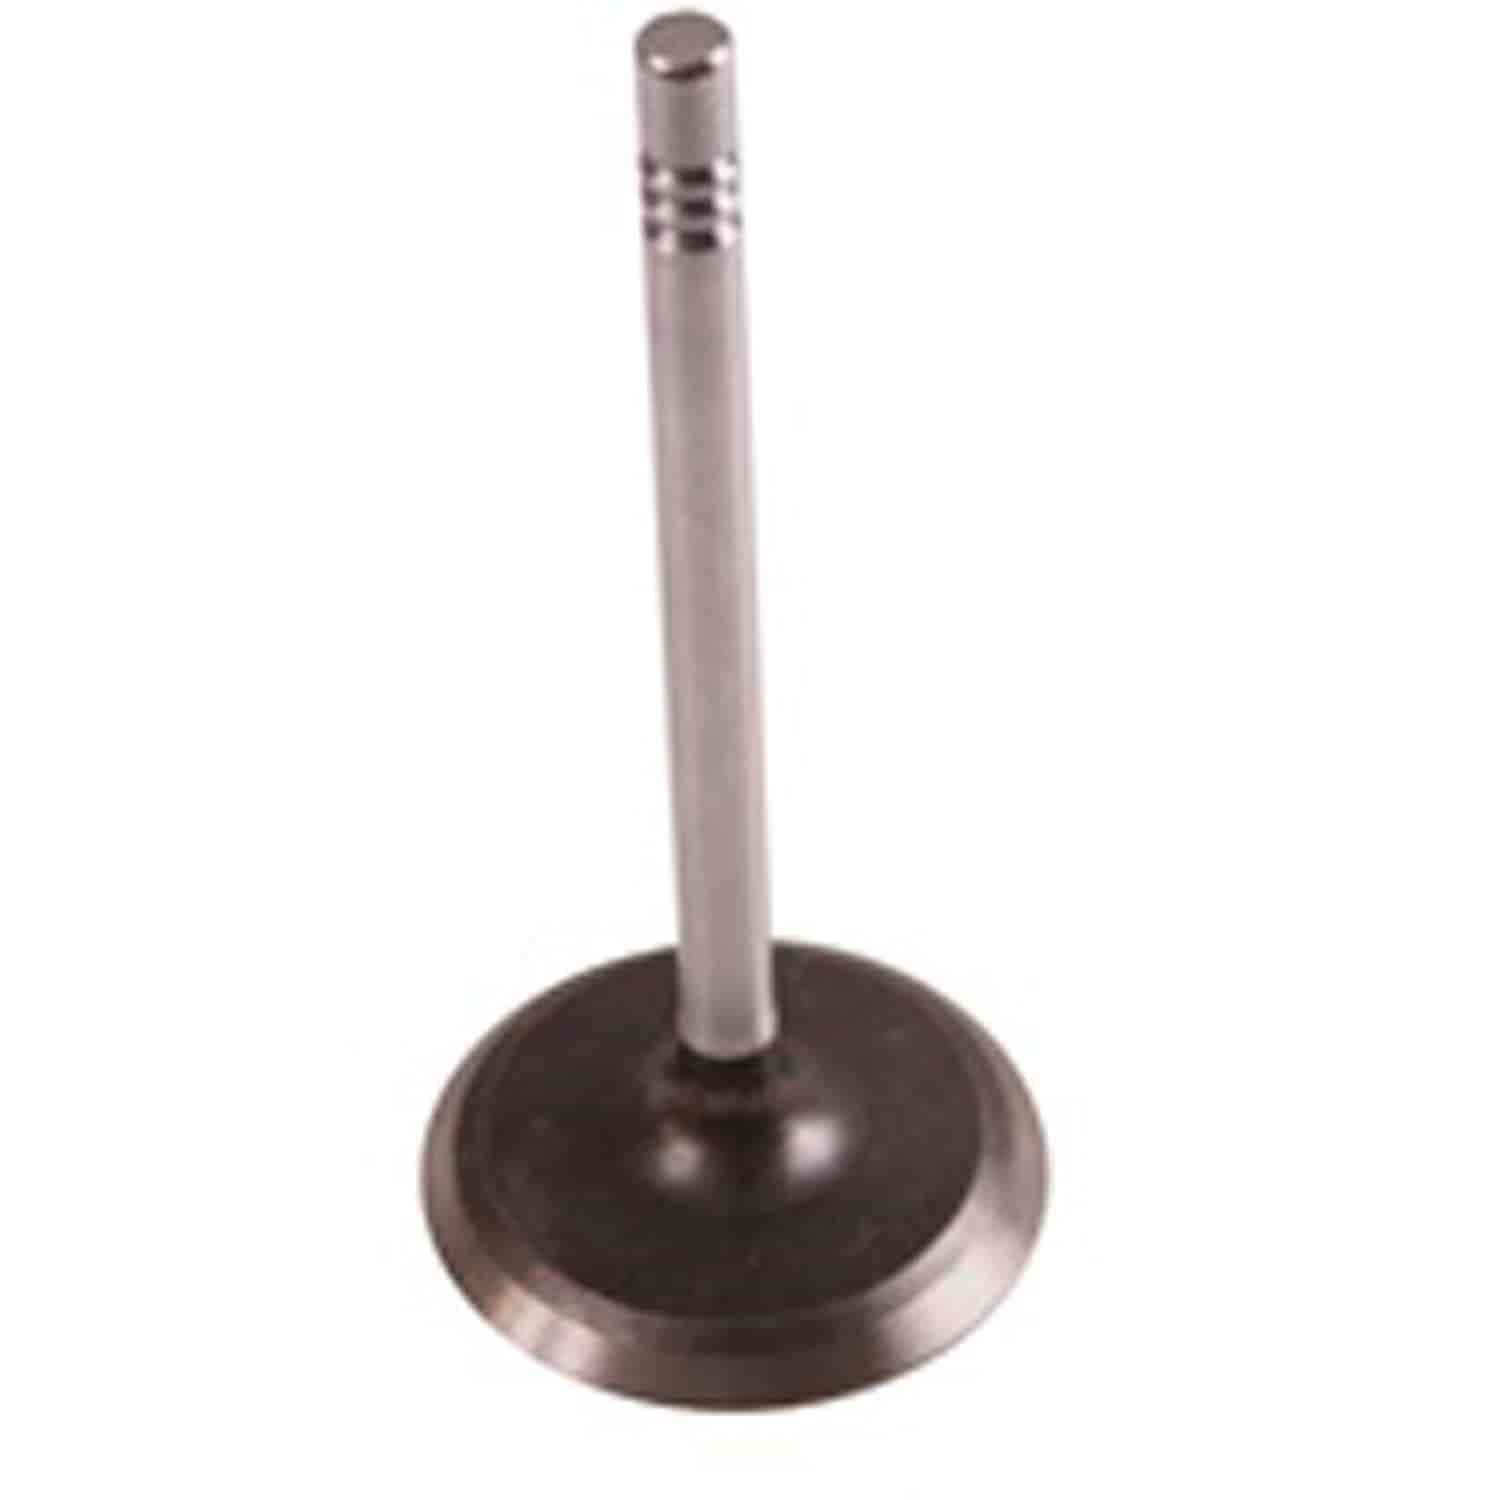 Exhaust Valve 4.2L Std 1981-1990 Jeep CJ and Wrangler By Omix-ADA